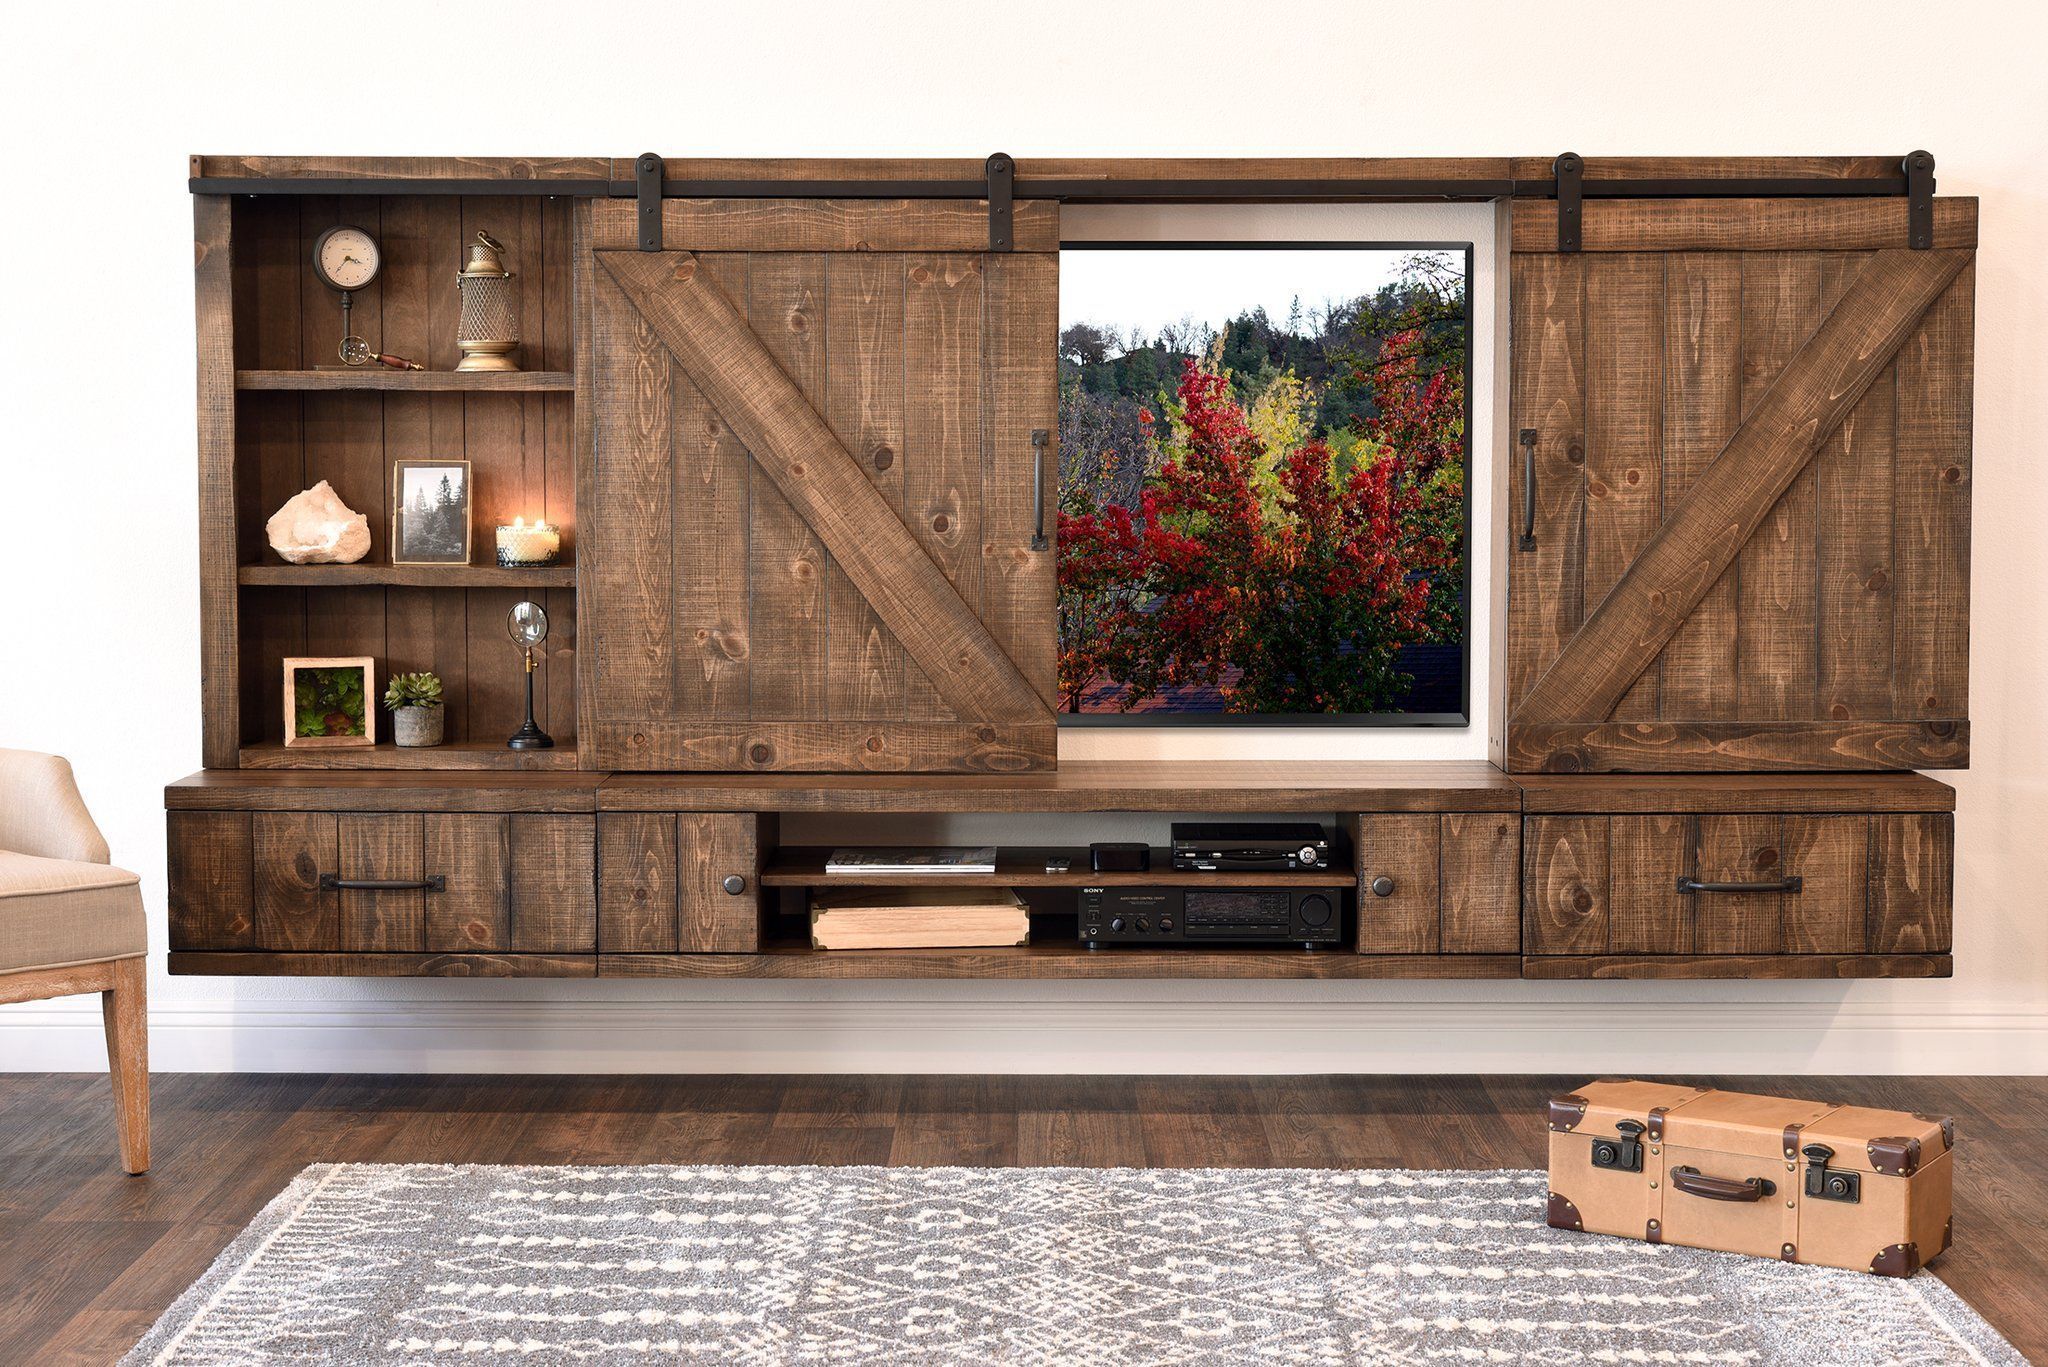 Farmhouse Barn Door Entertainment Center Floating Tv Stand – Spice Throughout Modern Farmhouse Rustic Tv Stands (Gallery 16 of 20)